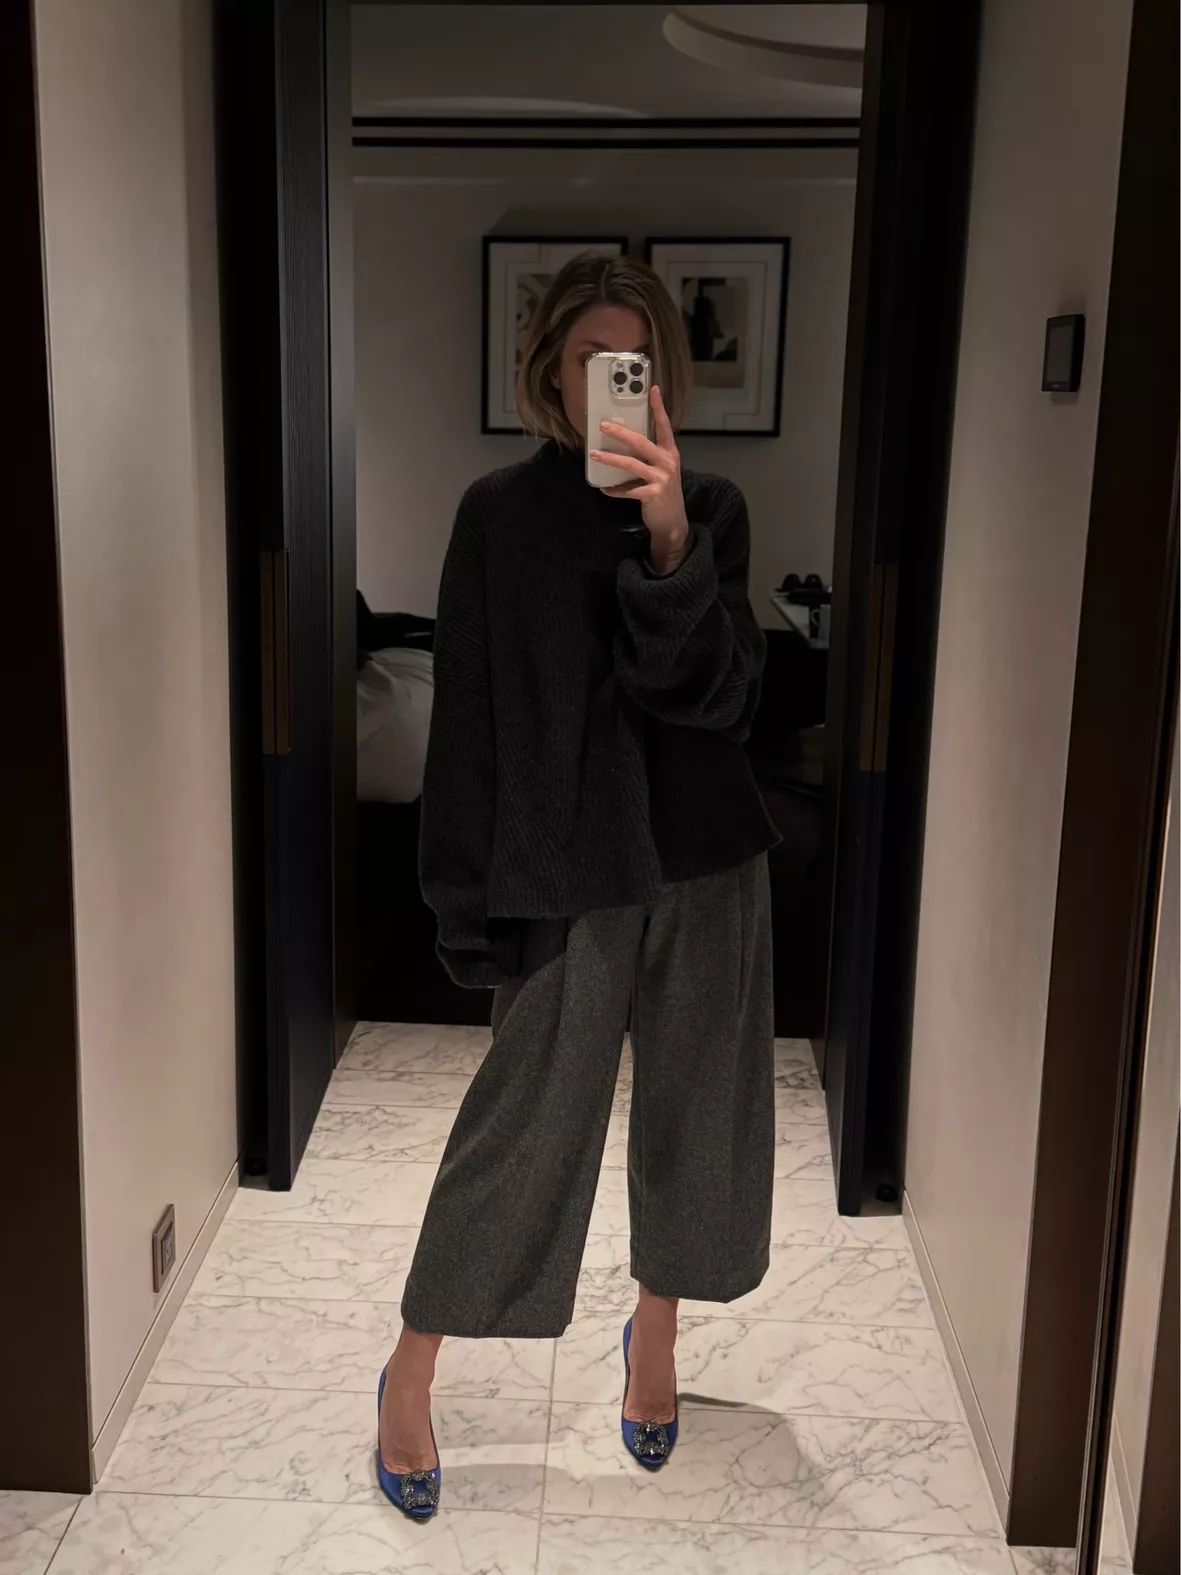 Tailored Culotte Pants Grey